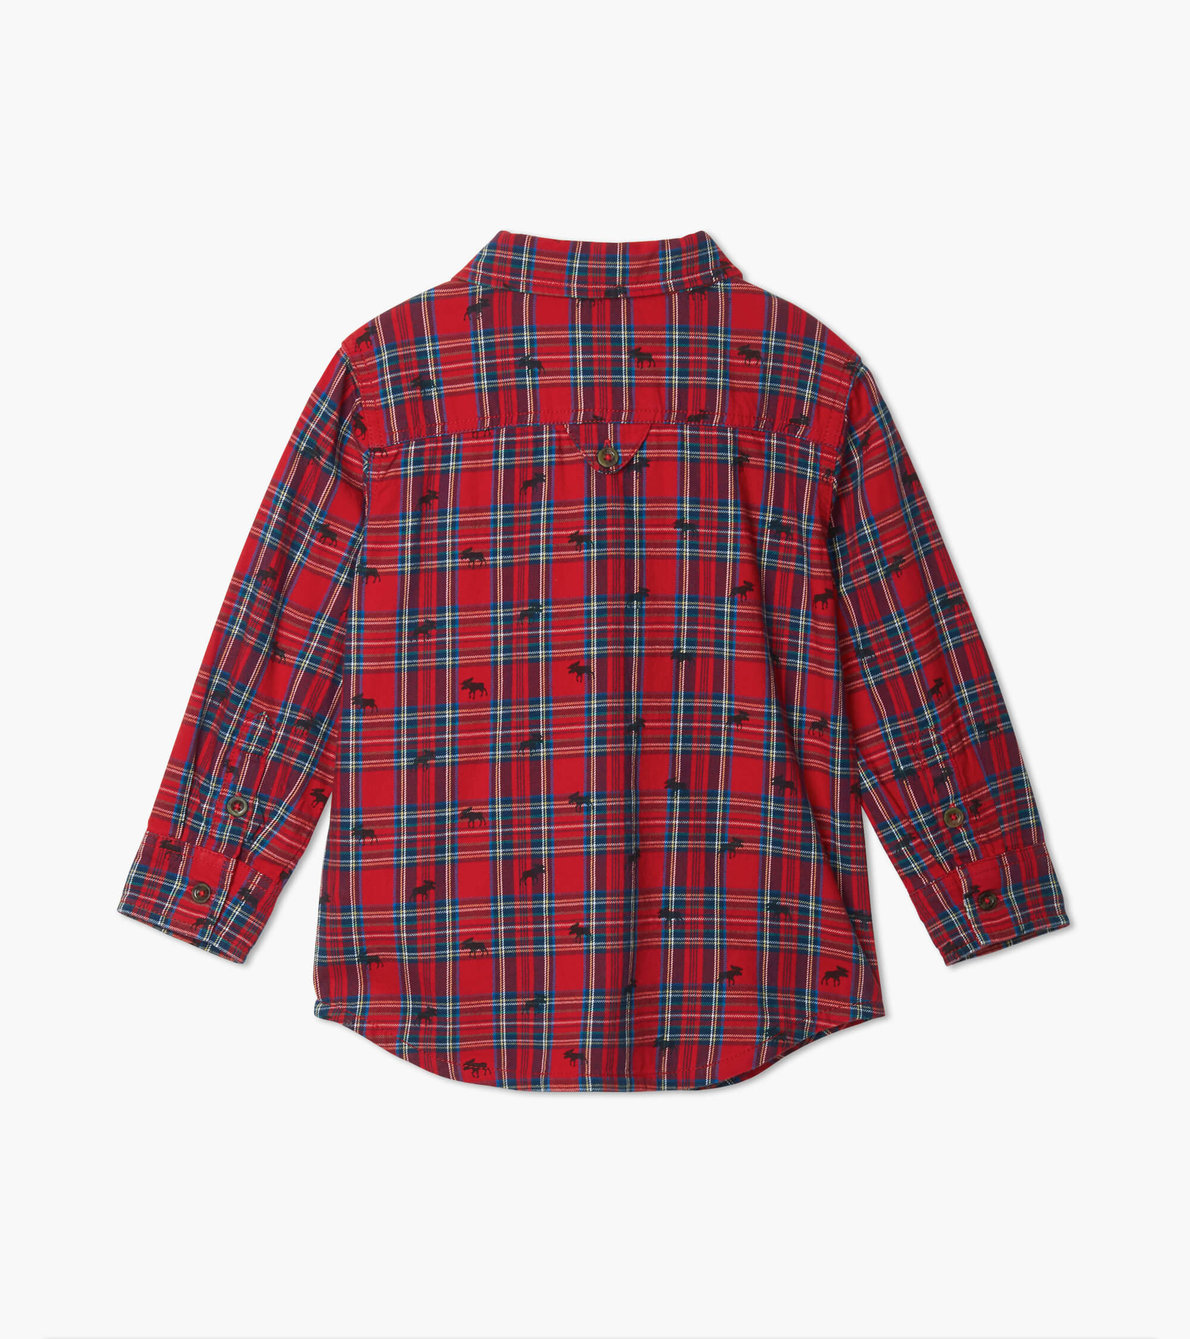 View larger image of Holiday Plaid Moose Button Down Shirt